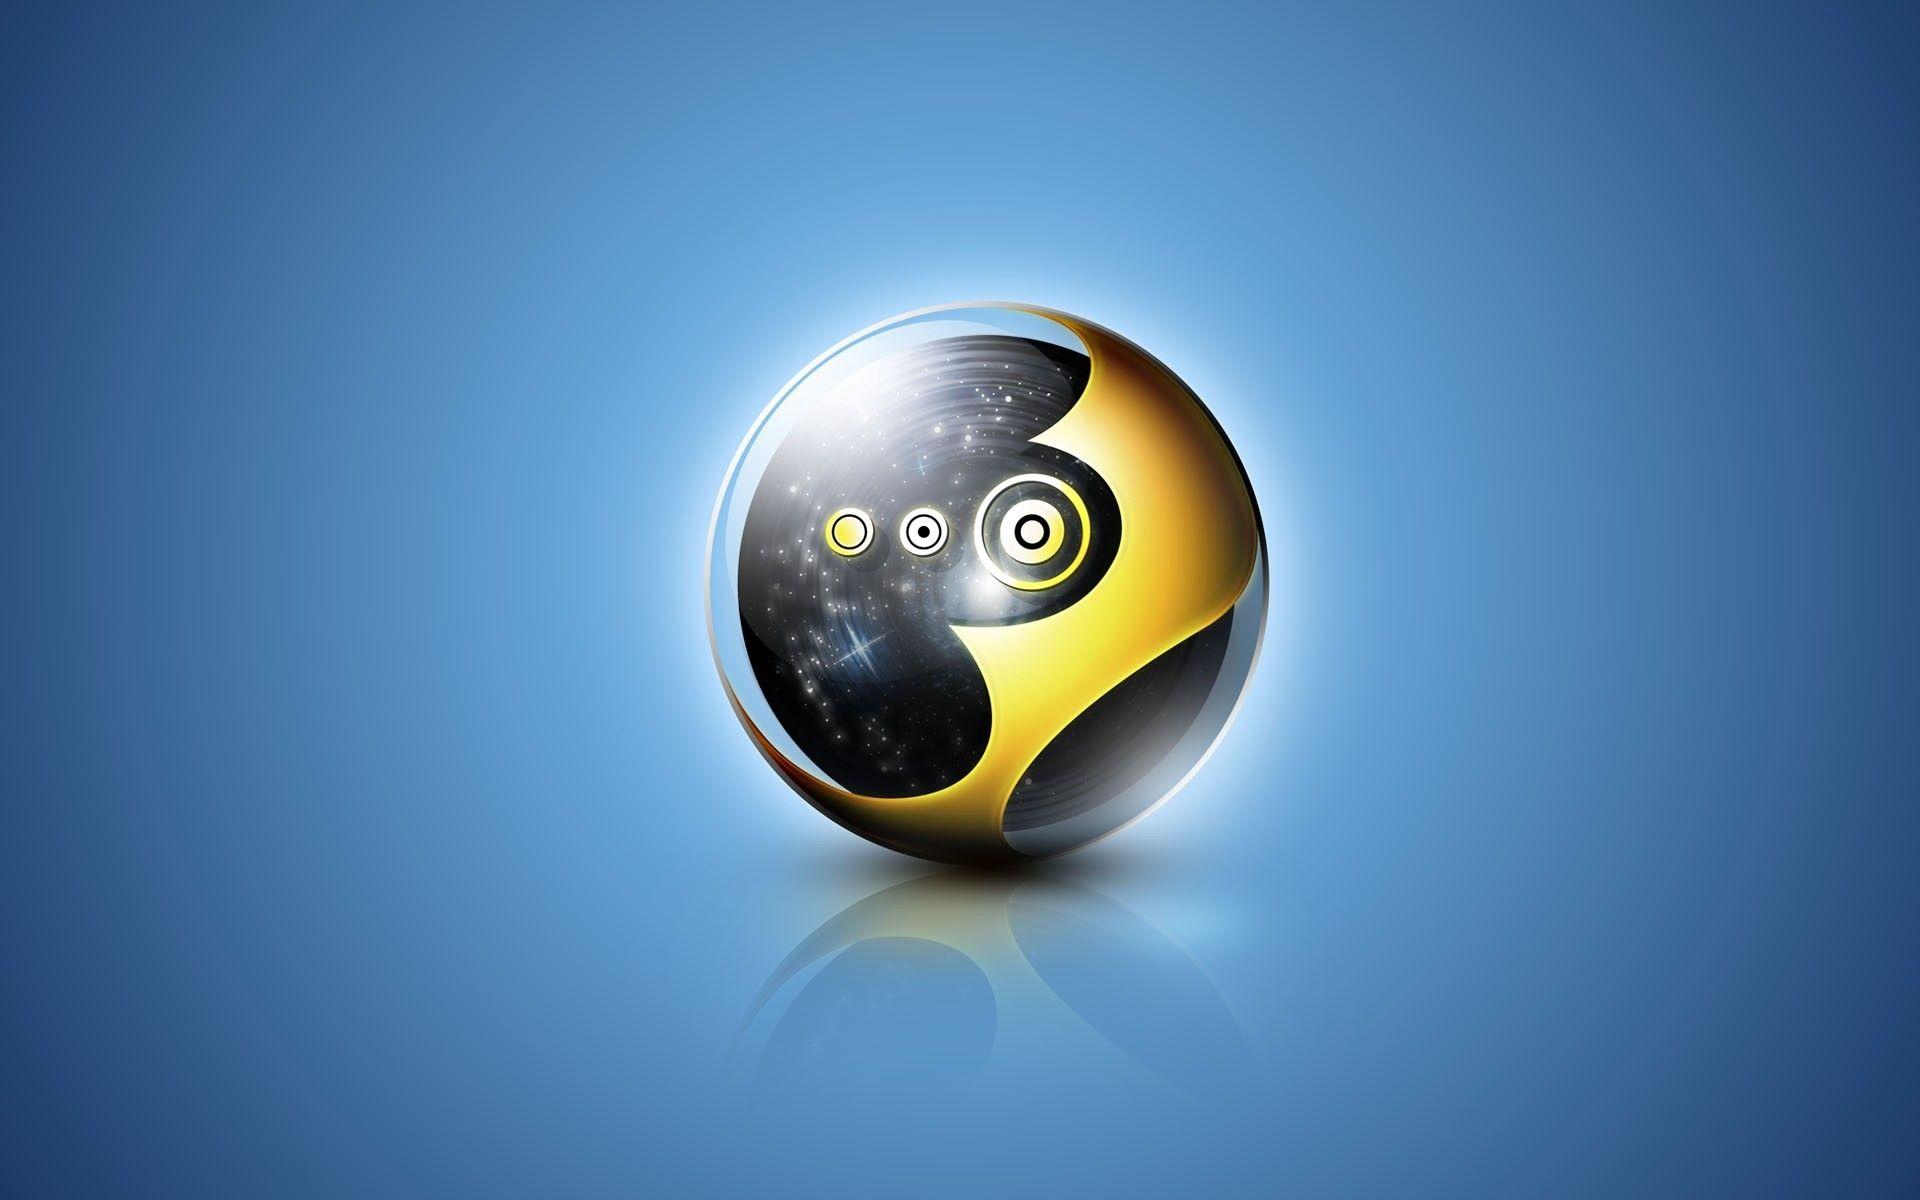 Black and Yellow Sphere Logo - Download wallpaper 1920x1200 ball, black, yellow, blue hd background